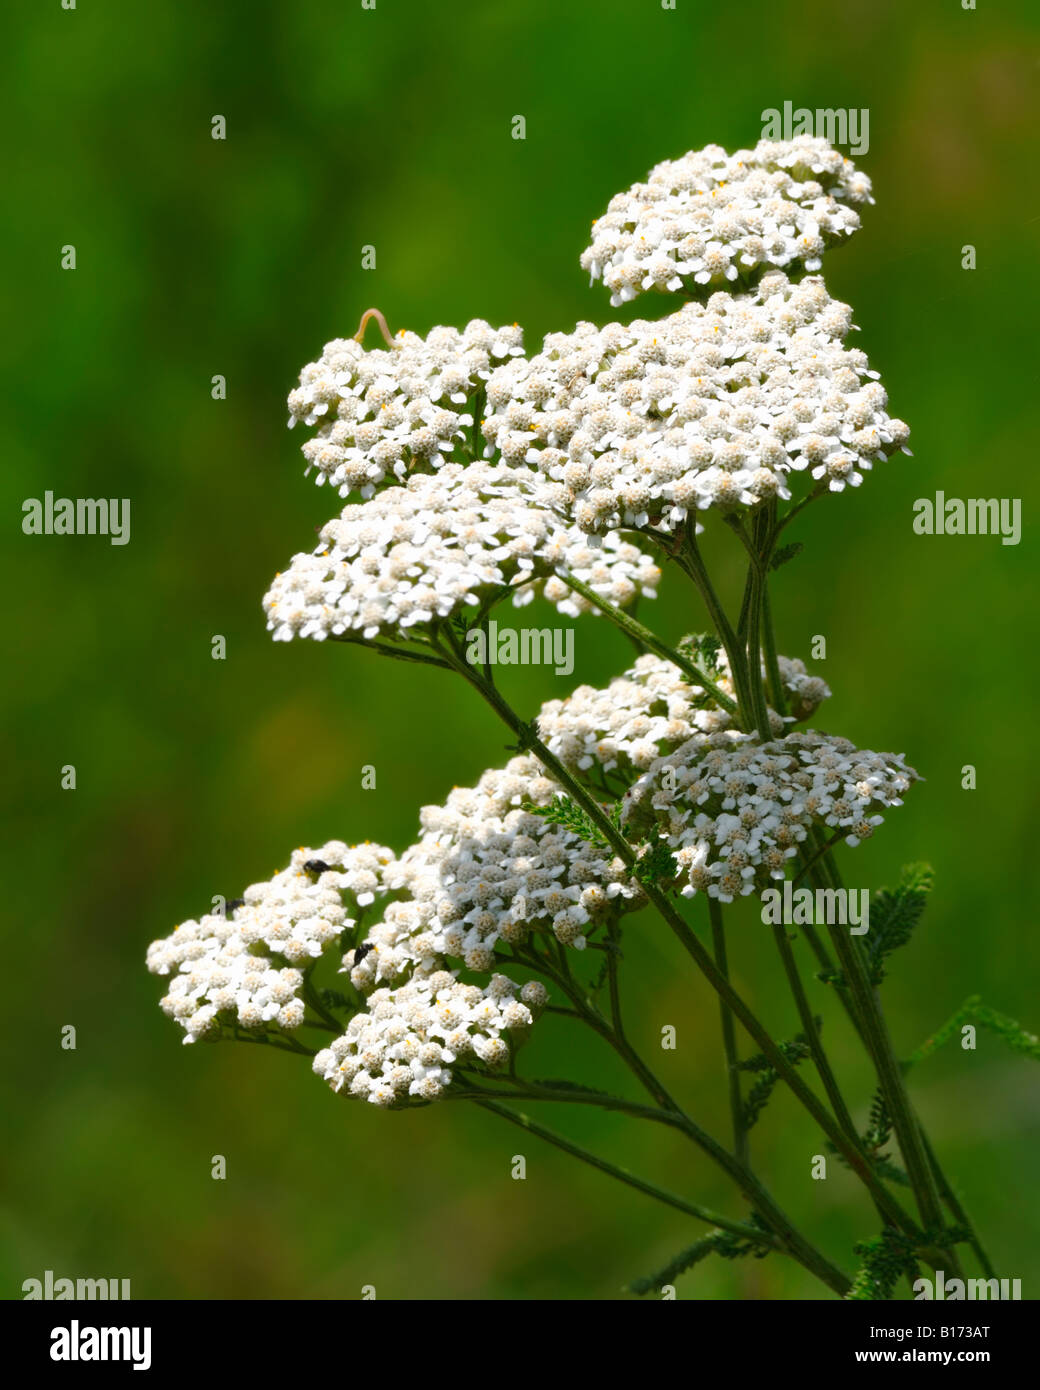 Common White Yarrow, a wildflower once used in herbal medicine by American Indians in North America. Oklahoma, USA. Stock Photo